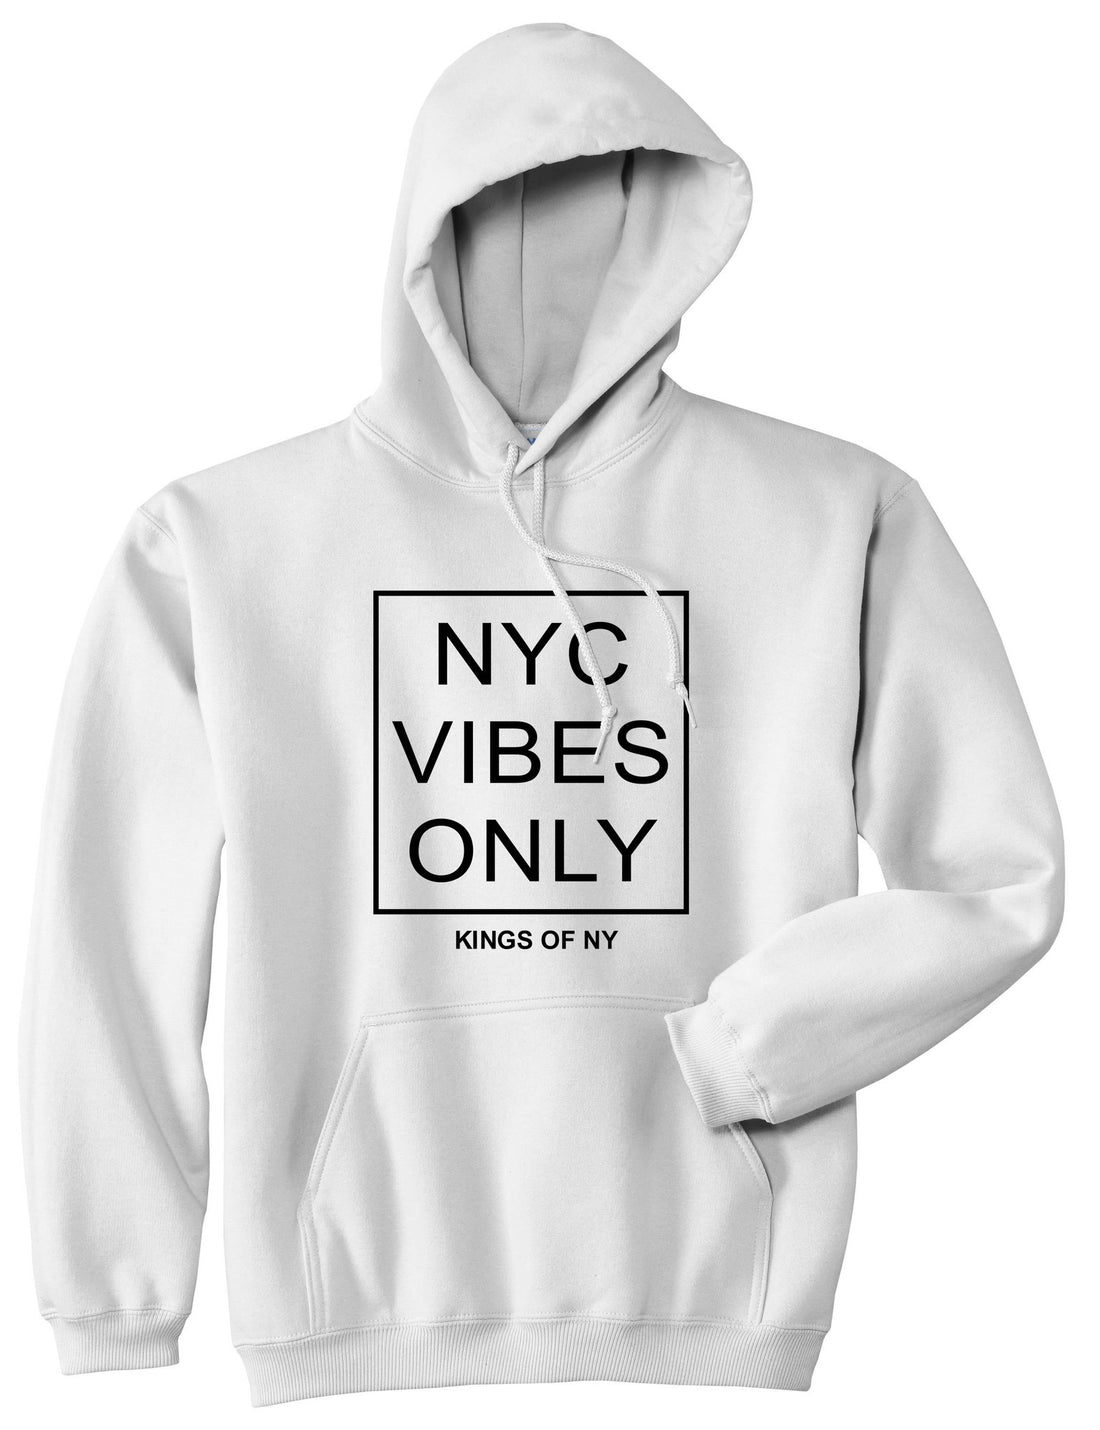 NYC Vibes Only Good Pullover Hoodie